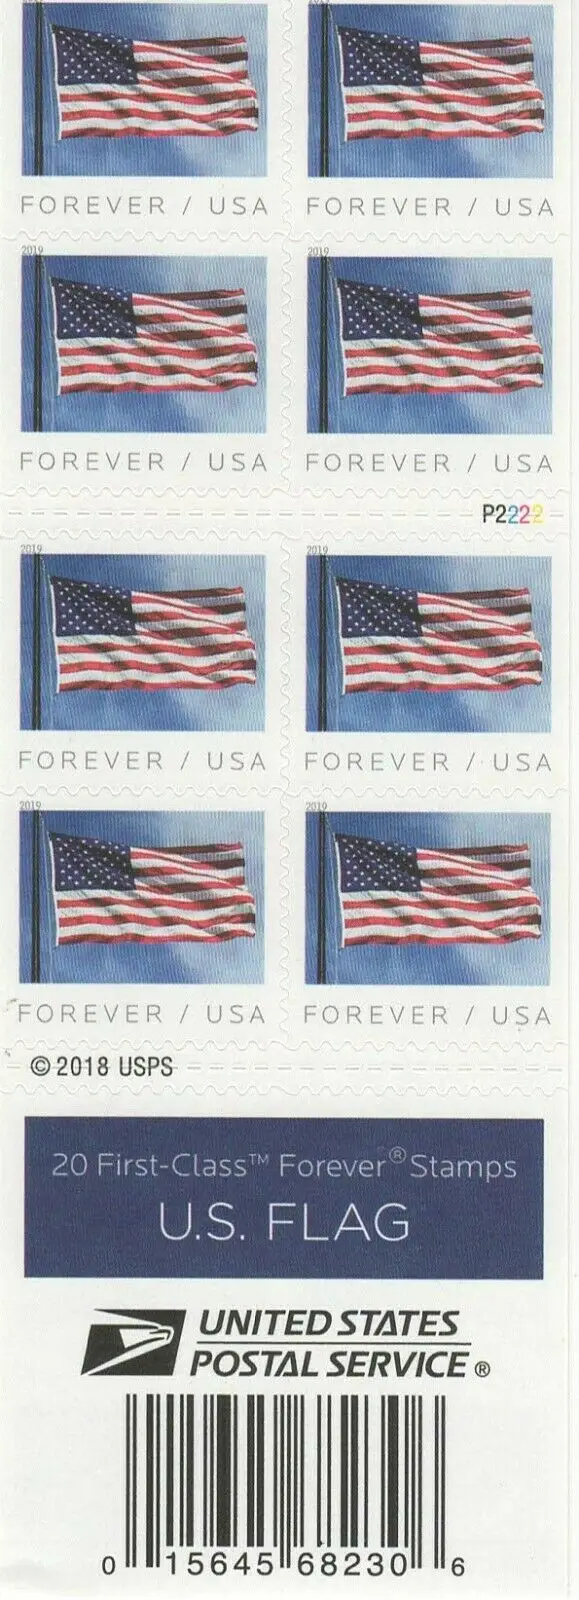 

2019 US Flag 3 Books of 20 USPS Forever First Class Postage Stamps Patriotic American Celebration (60 Stamps)